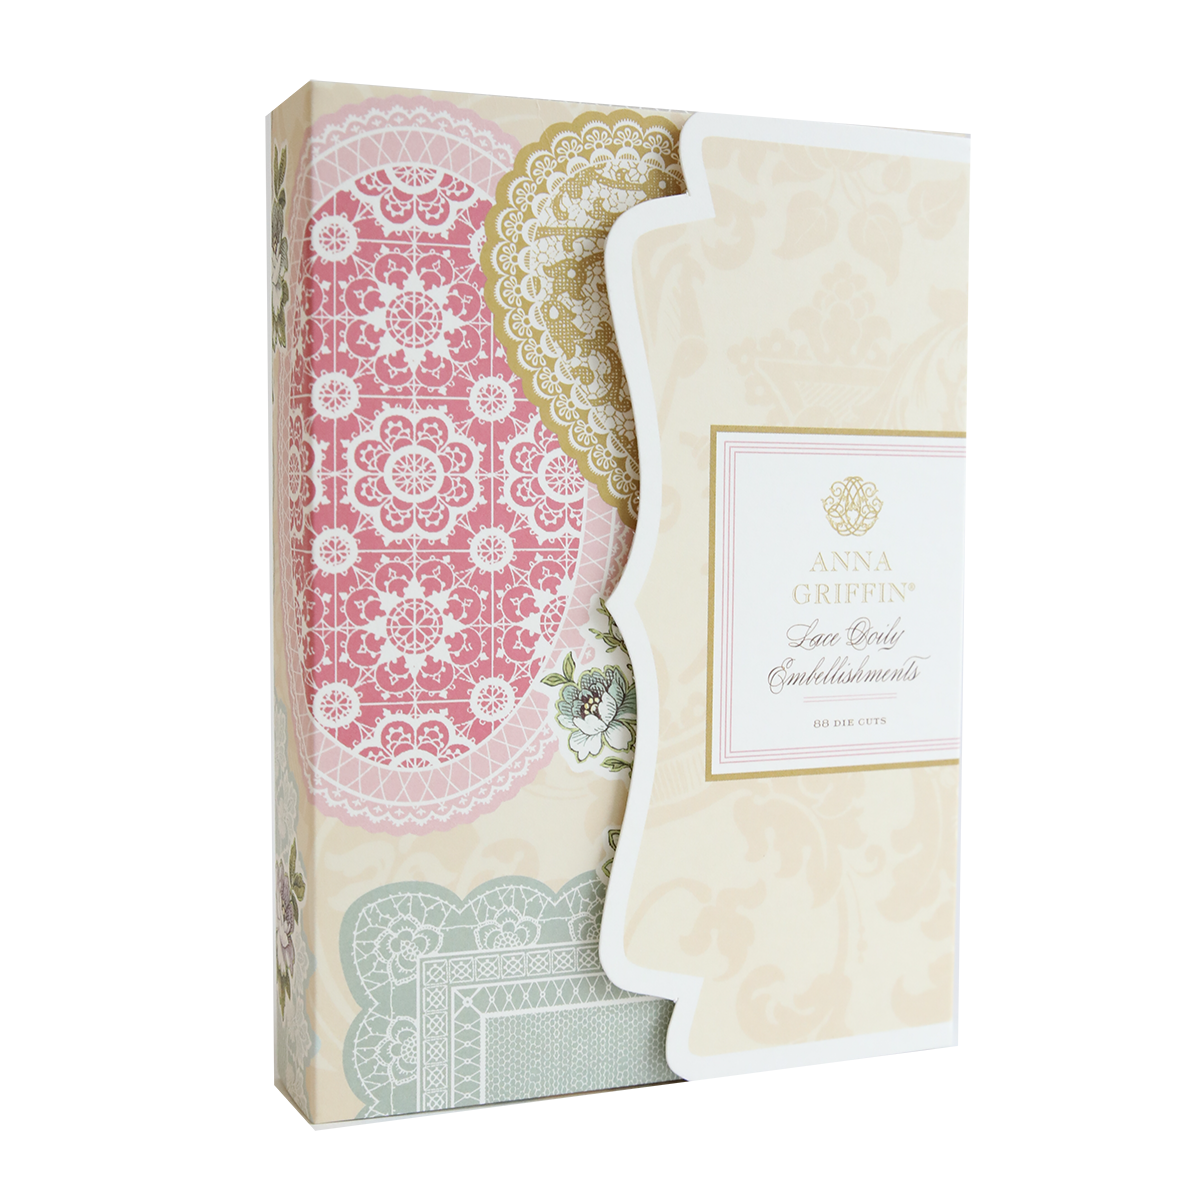 A pink and white box adorned with Lace Doily Embellishments.